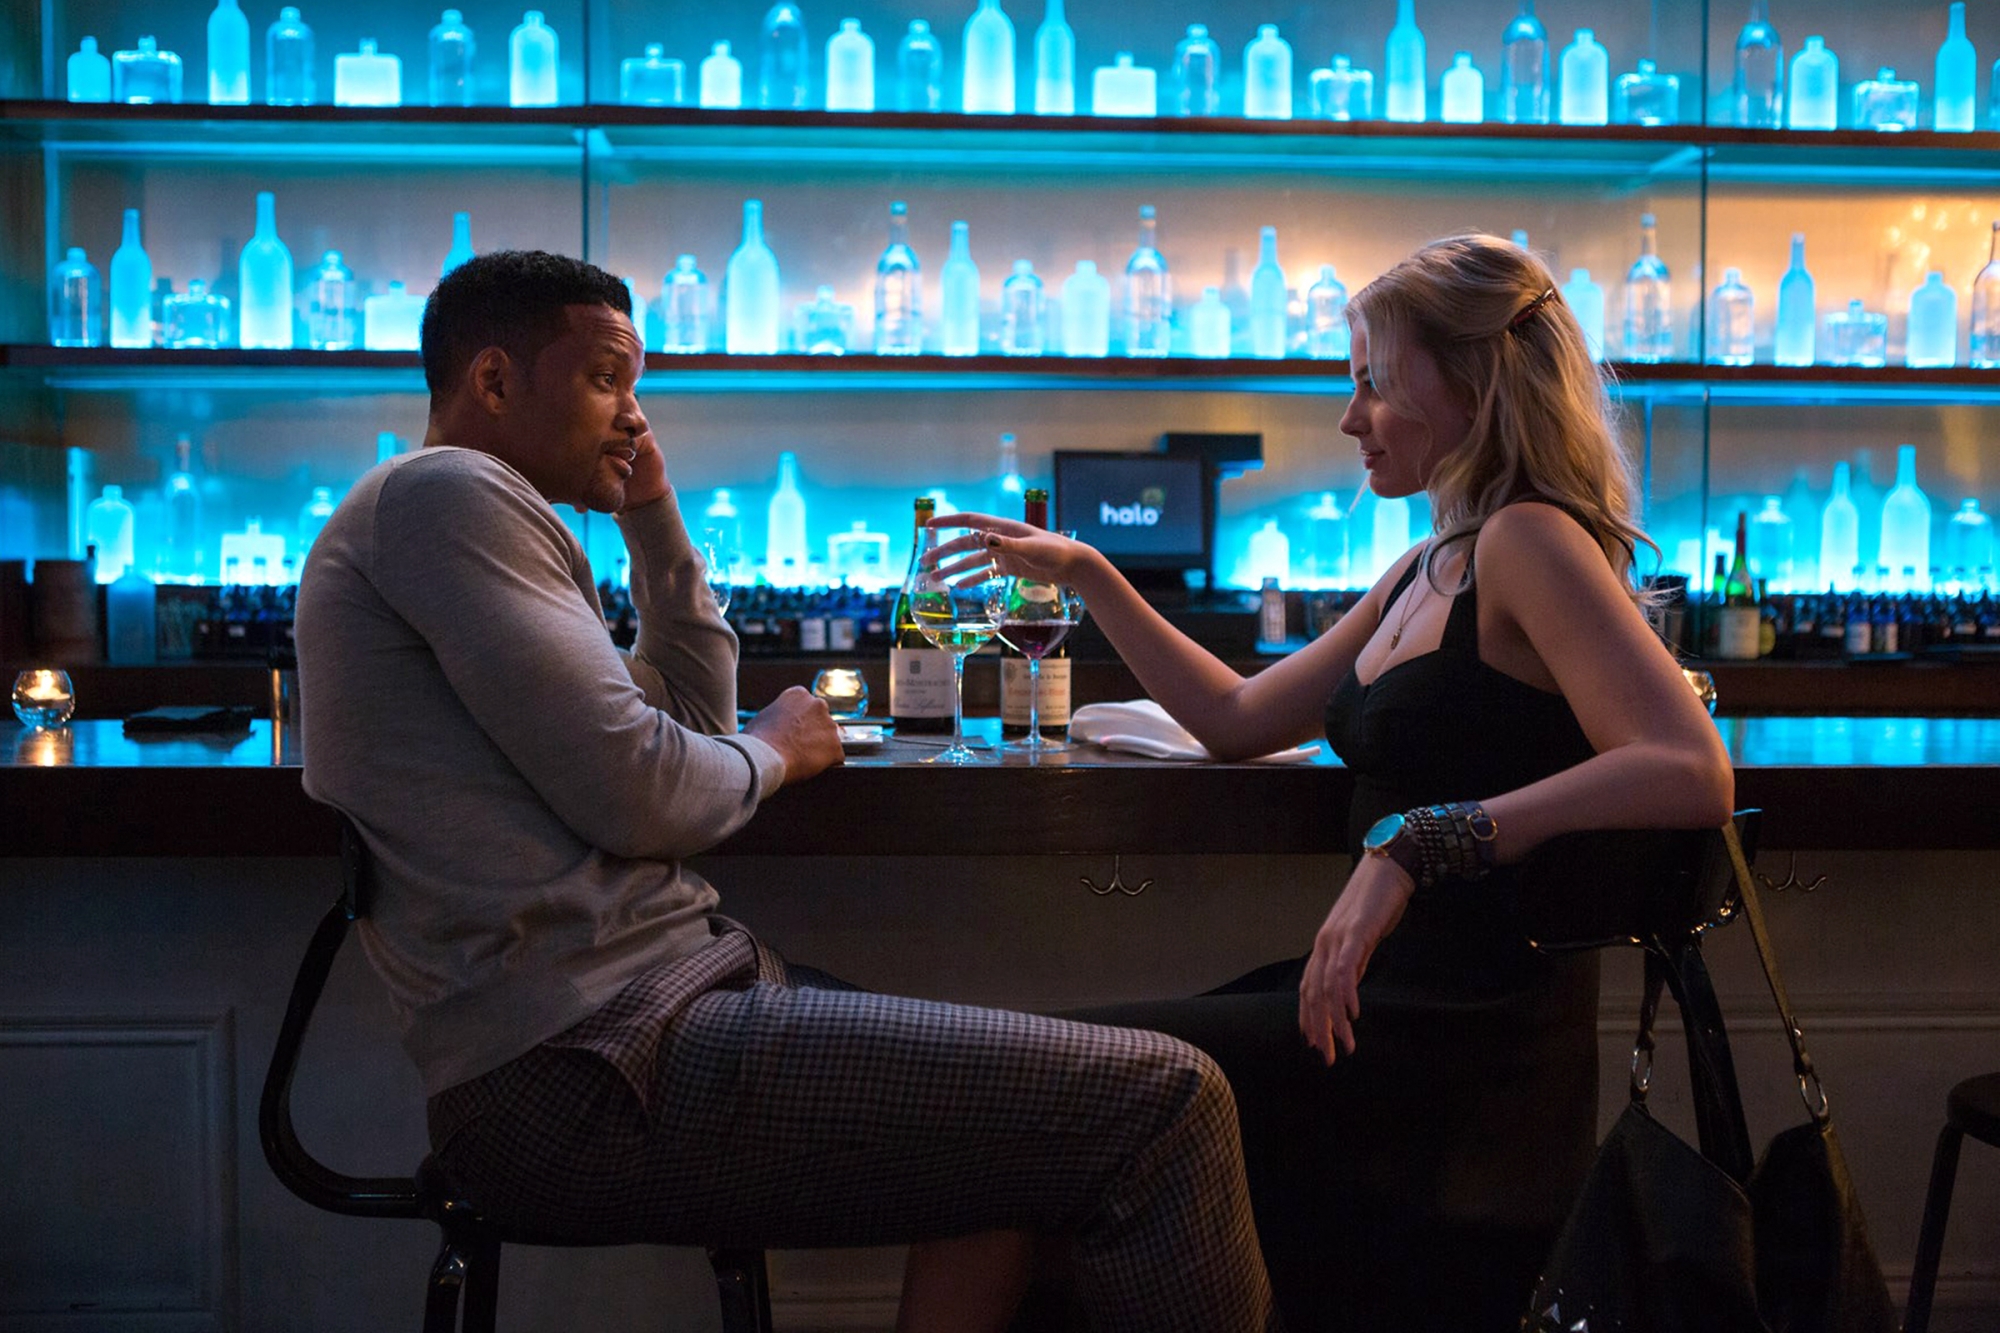 Will-Smith-and-Margot-Robbie-in-Focus-2015-Movie-Image